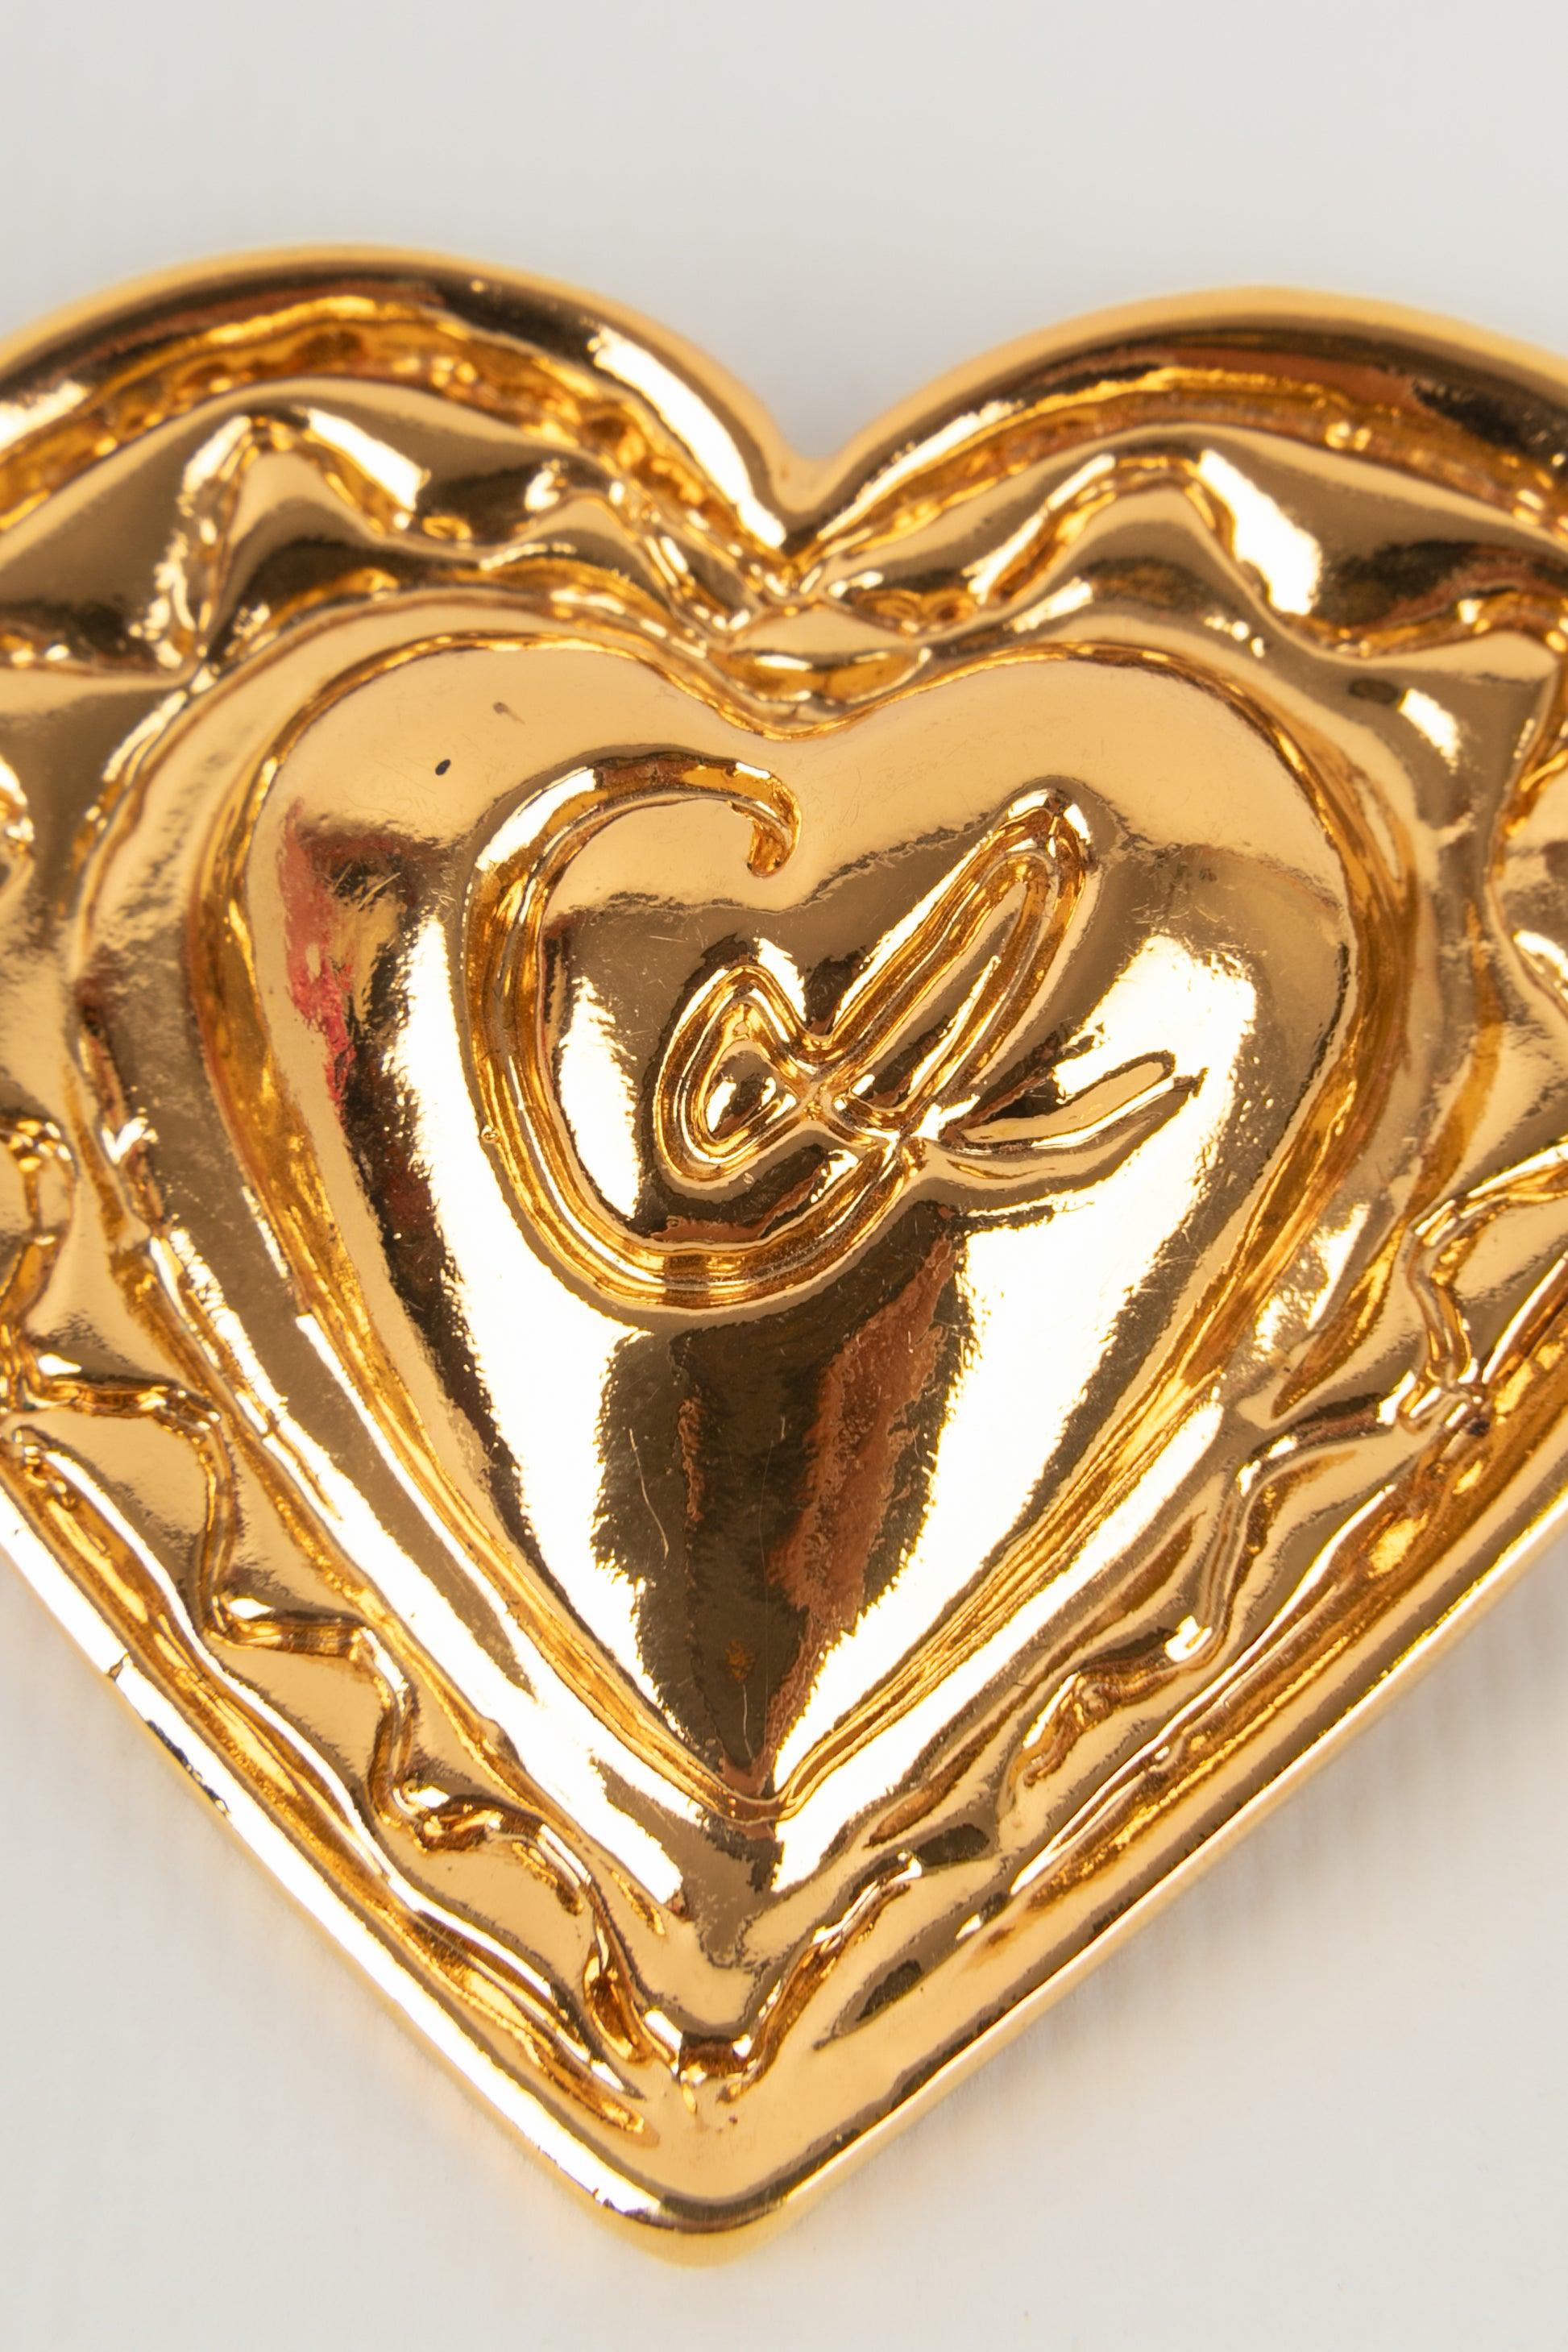 Christian Lacroix - (Made in France) Brooch in gilded metal depicting a heart. Jewelry dating from the mid-1990s.

Additional information:
Condition: Very good condition
Dimensions: 6 cm x 6 cm
Period: 20th Century

Seller Reference: BR199